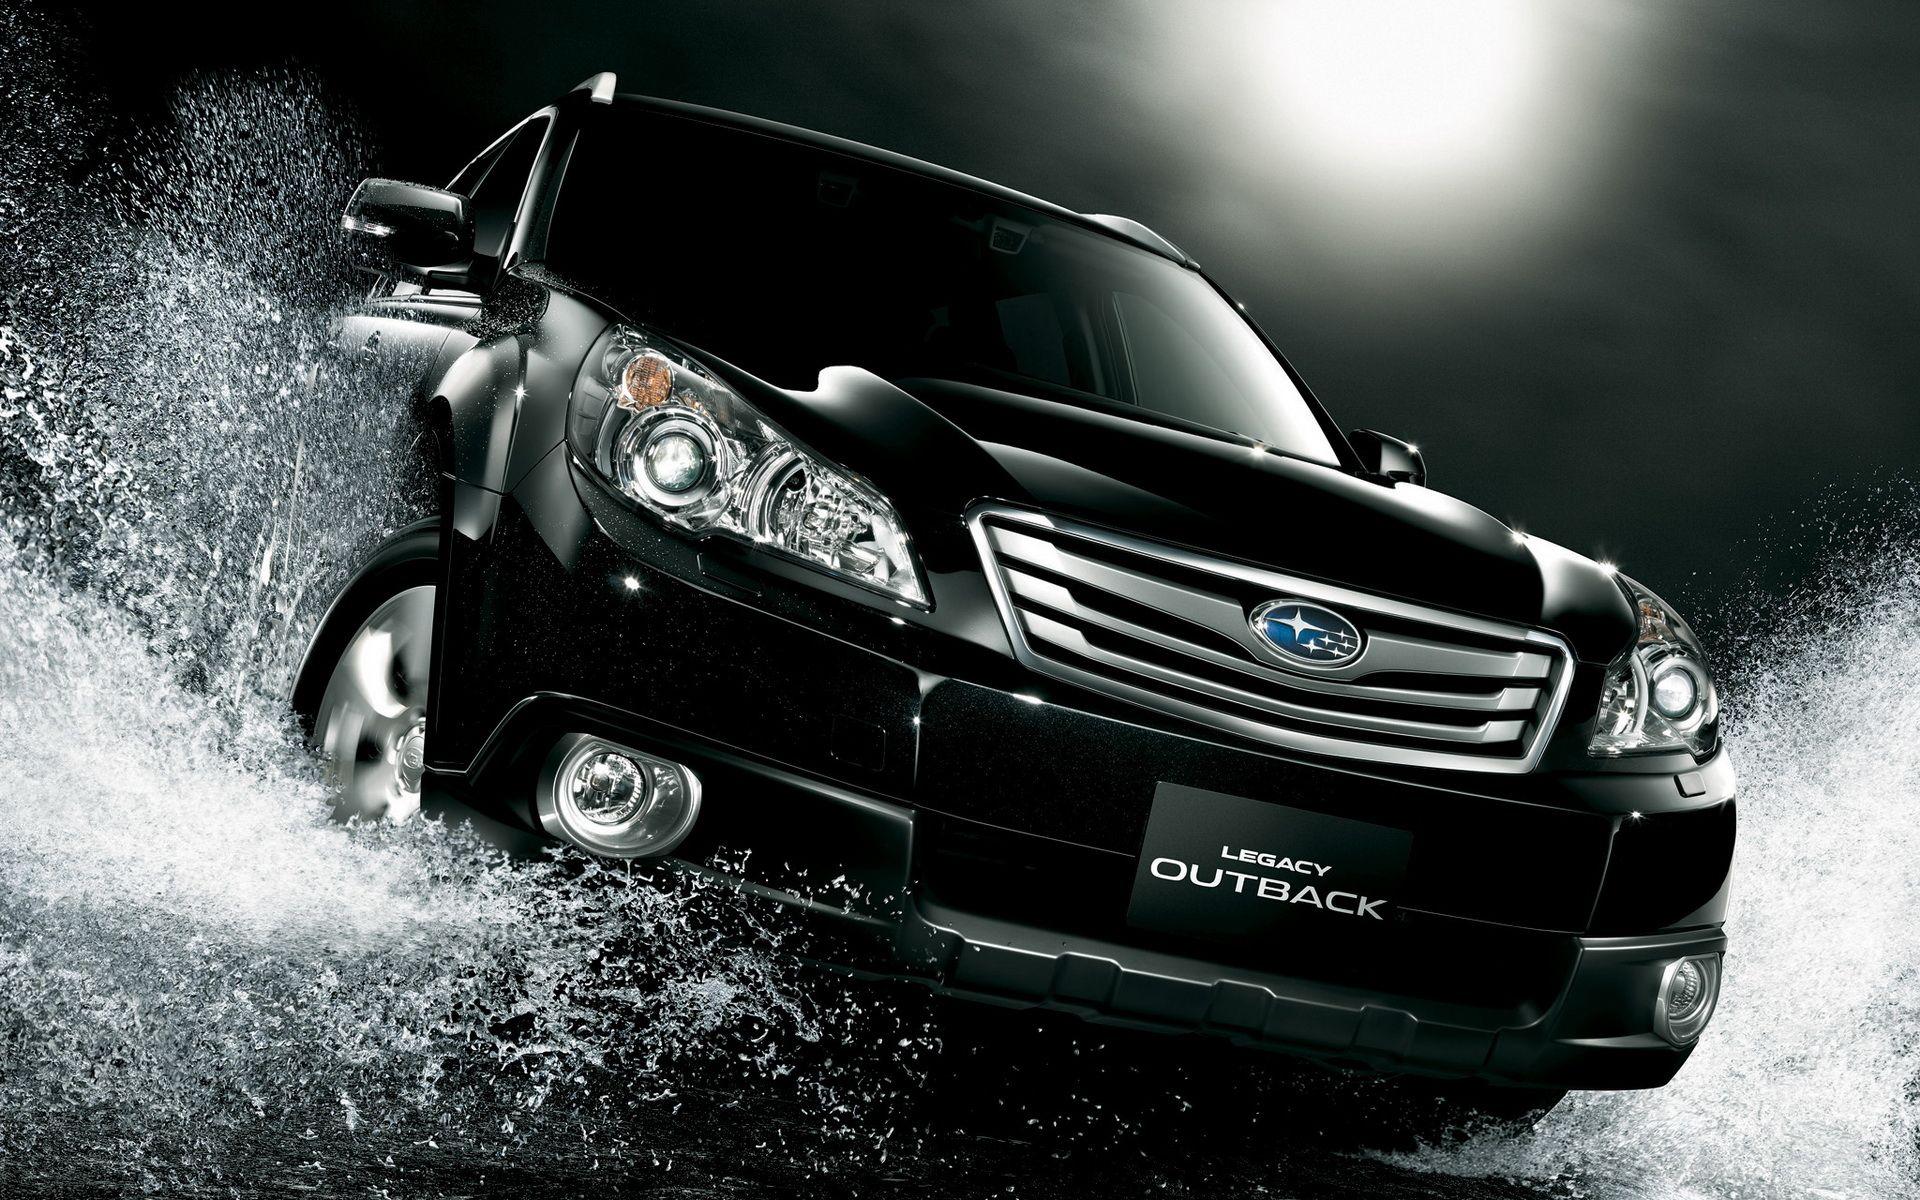 Subaru Legacy Outback 3.6r wallpaper and image